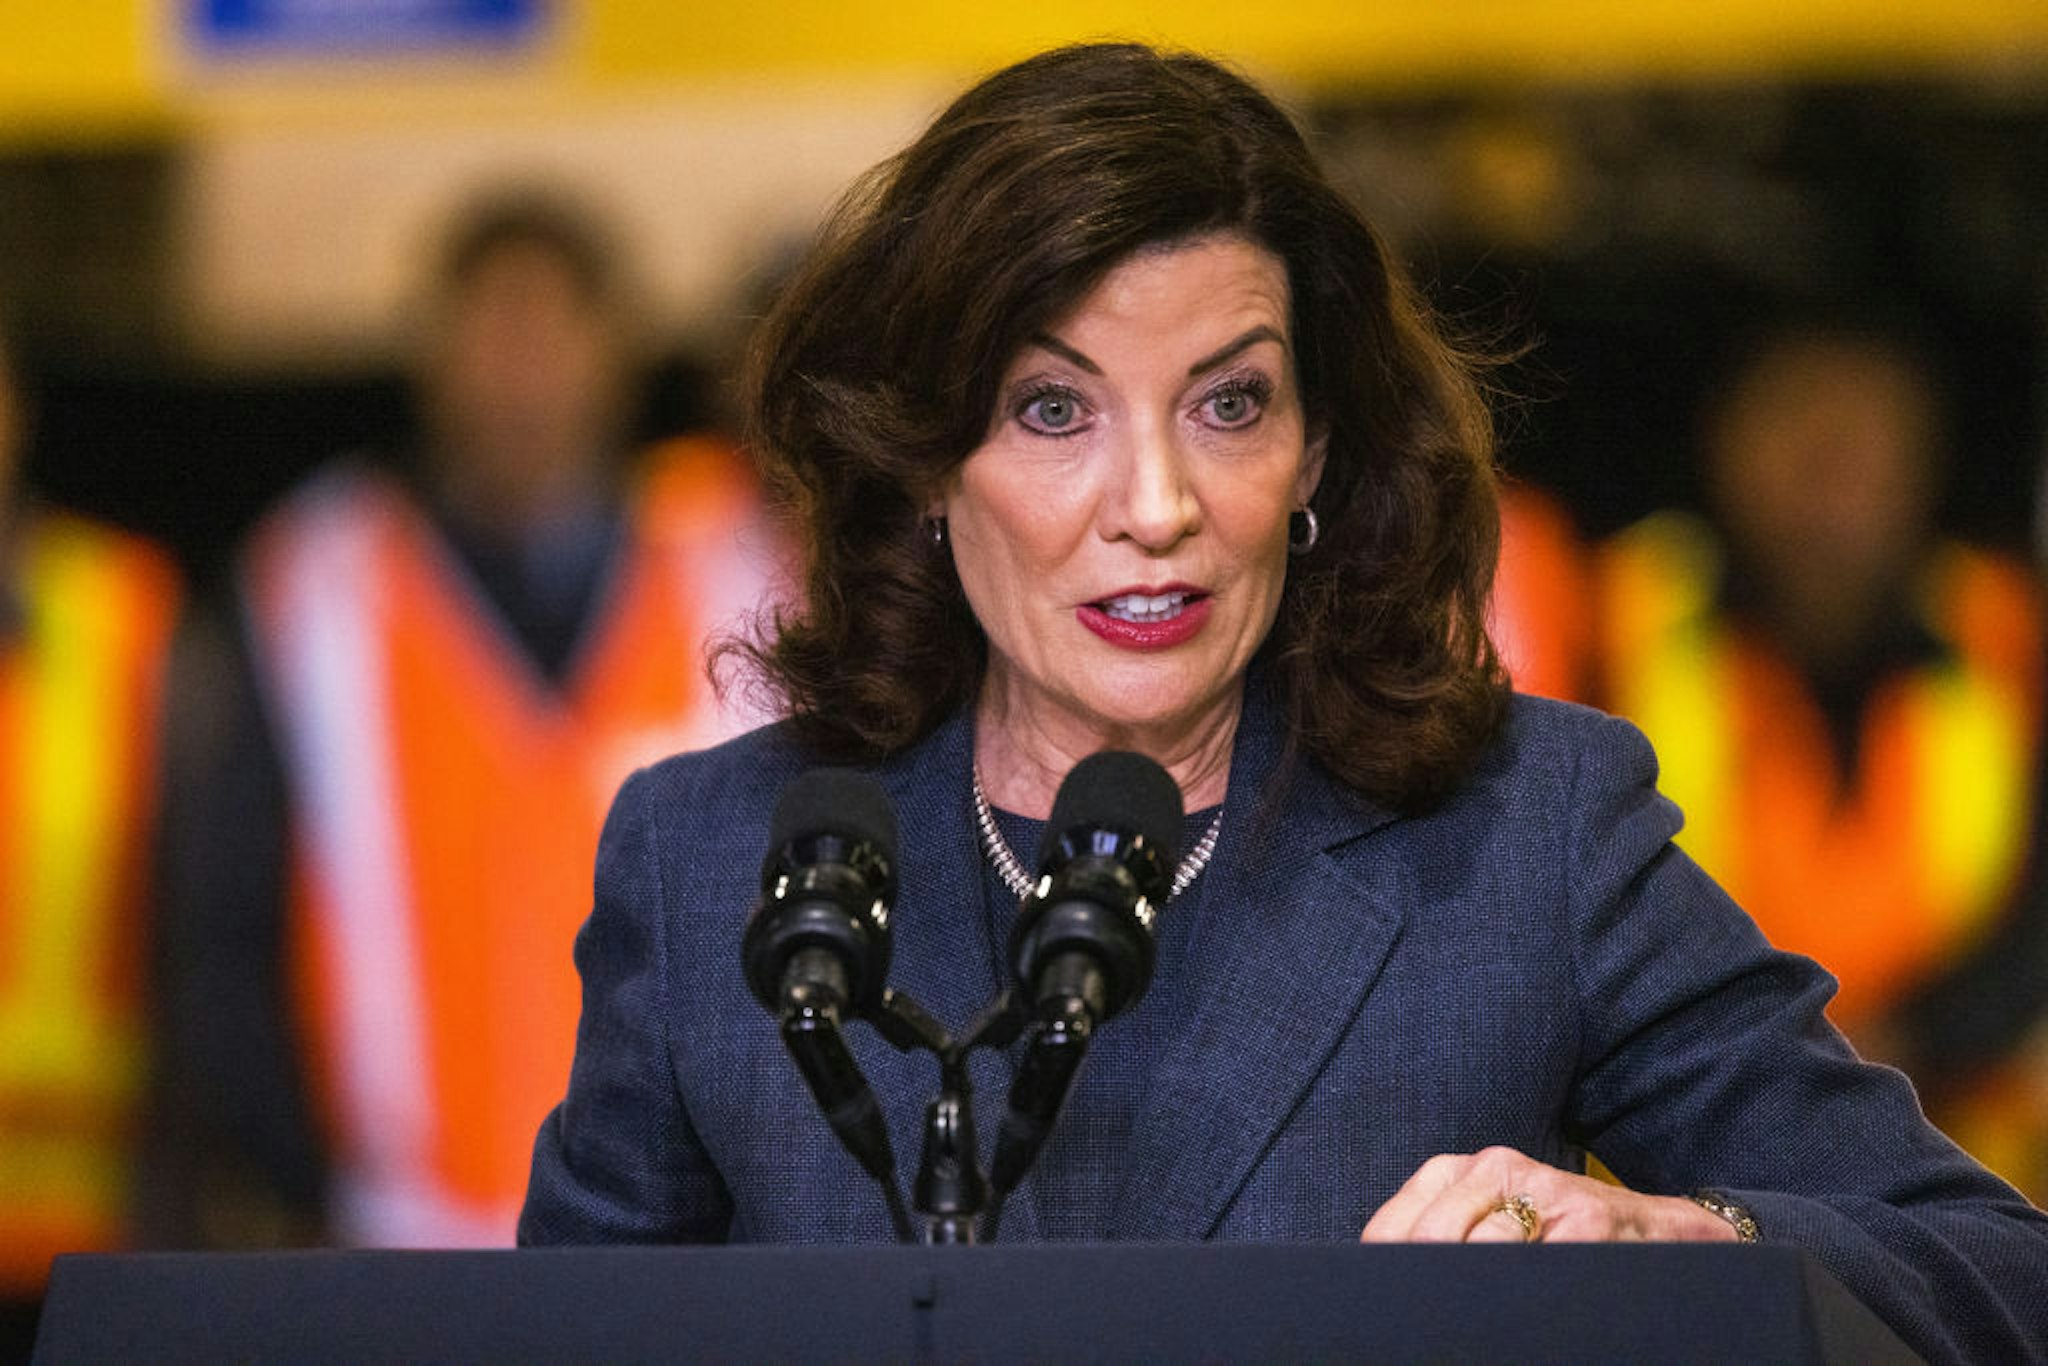 NEW YORK, NEW YORK - JANUARY 31: New York Gov. Kathy Hochul gives a speech on the Hudson River tunnel project at the West Side Yard on January 31, 2023 in New York City. President Biden traveled to New York to speak about how the passage of the bipartisan infrastructure law will help fund the Hudson River tunnel project and improve reliability for the 200,000 passenger trips per weekday on Amtrak and NJ Transit. (Photo by Michael M. Santiago/Getty Images)